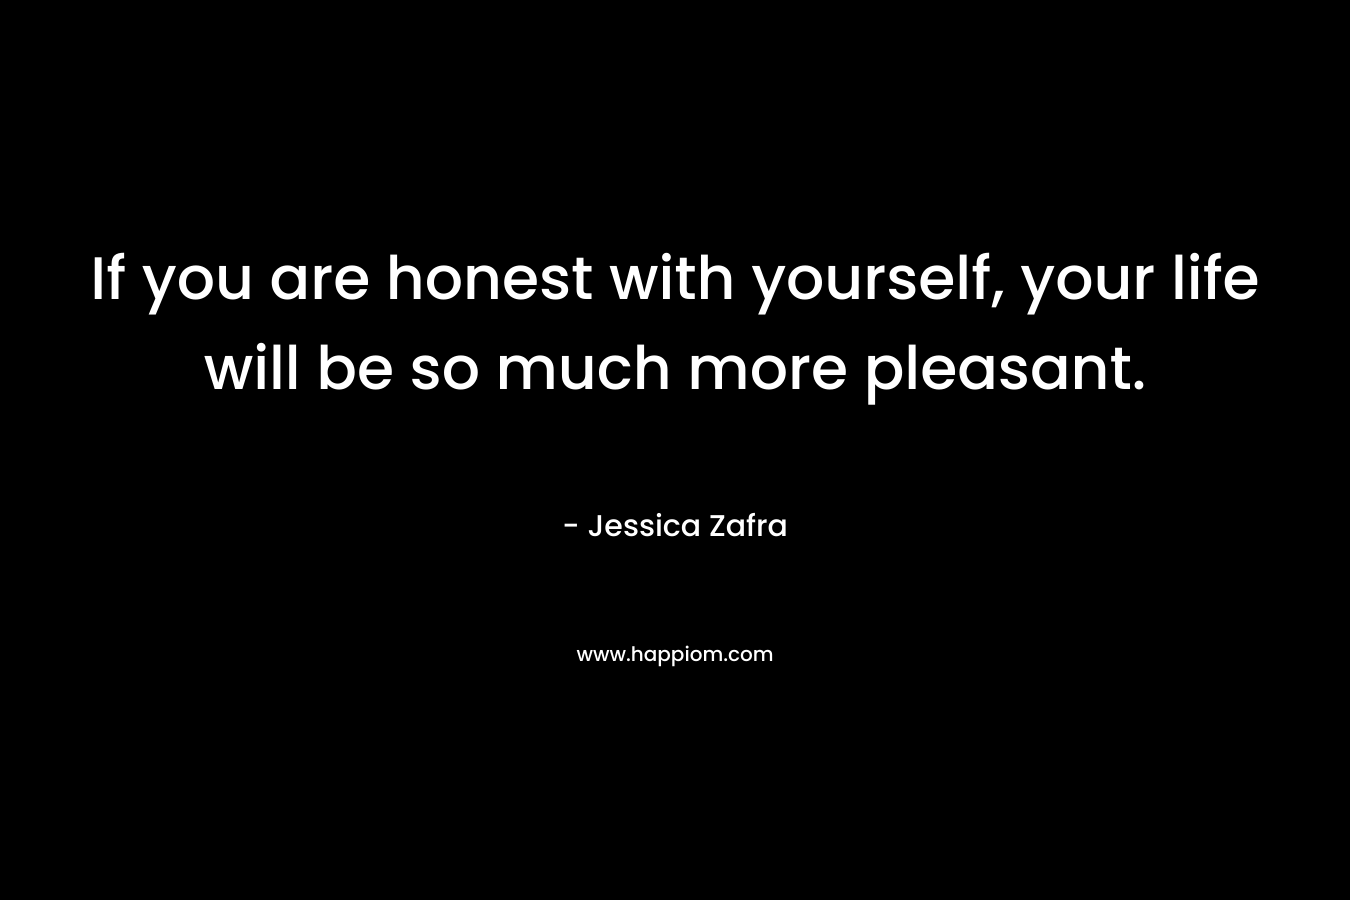 If you are honest with yourself, your life will be so much more pleasant.